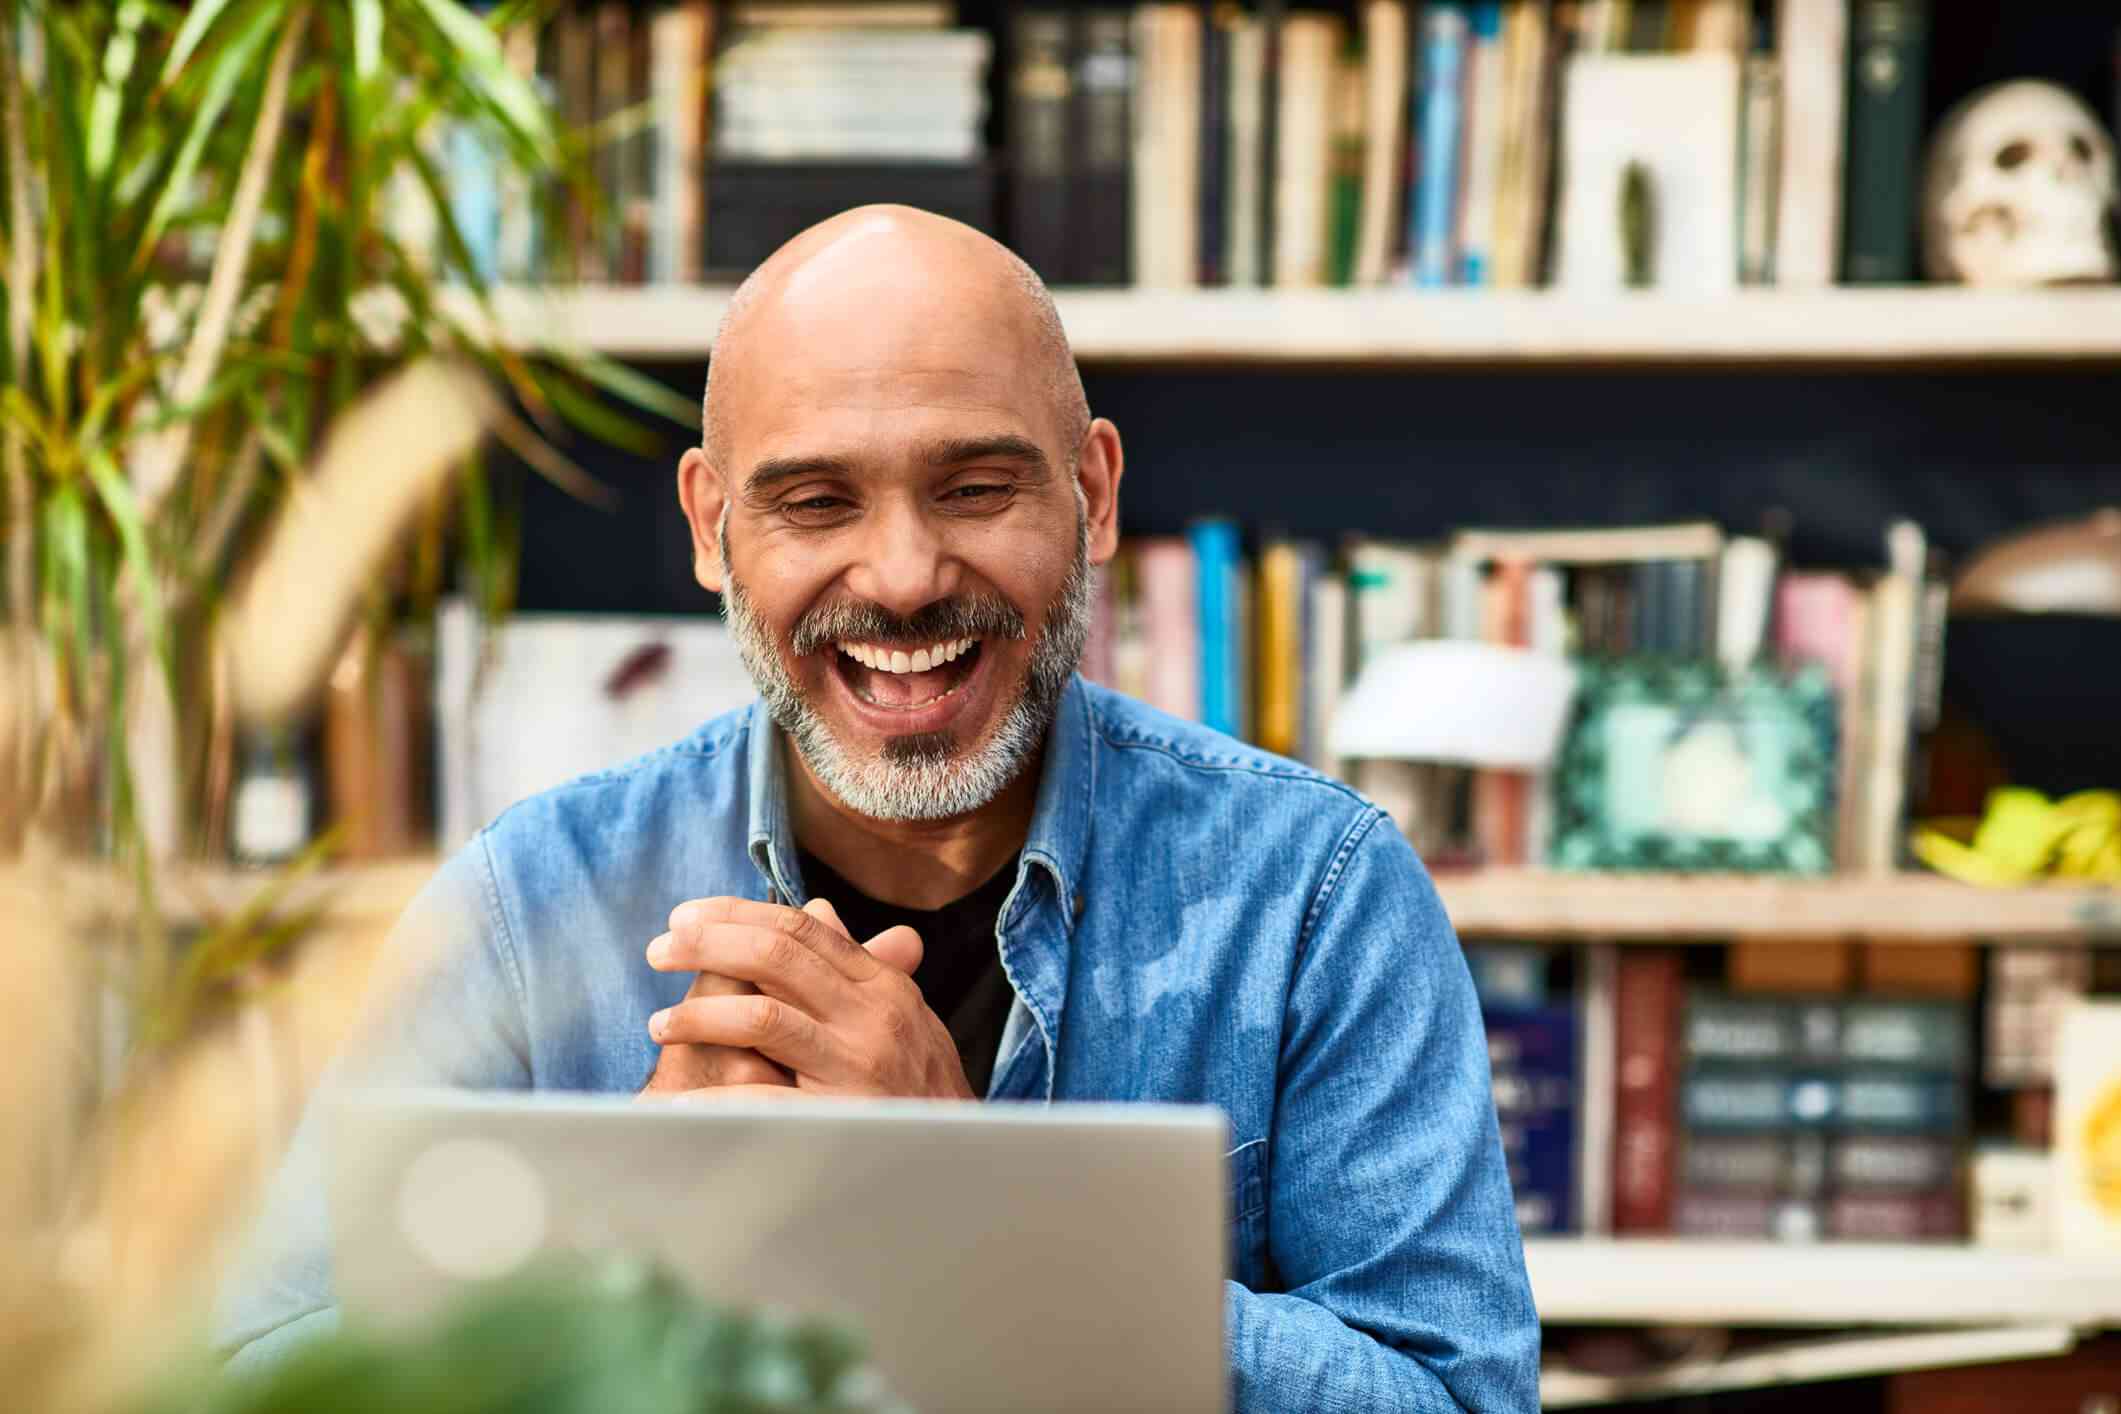 A man wearing a denim button-down shirt smiles widely and grasps his hands together as he attends an online therapy session from his home office. 